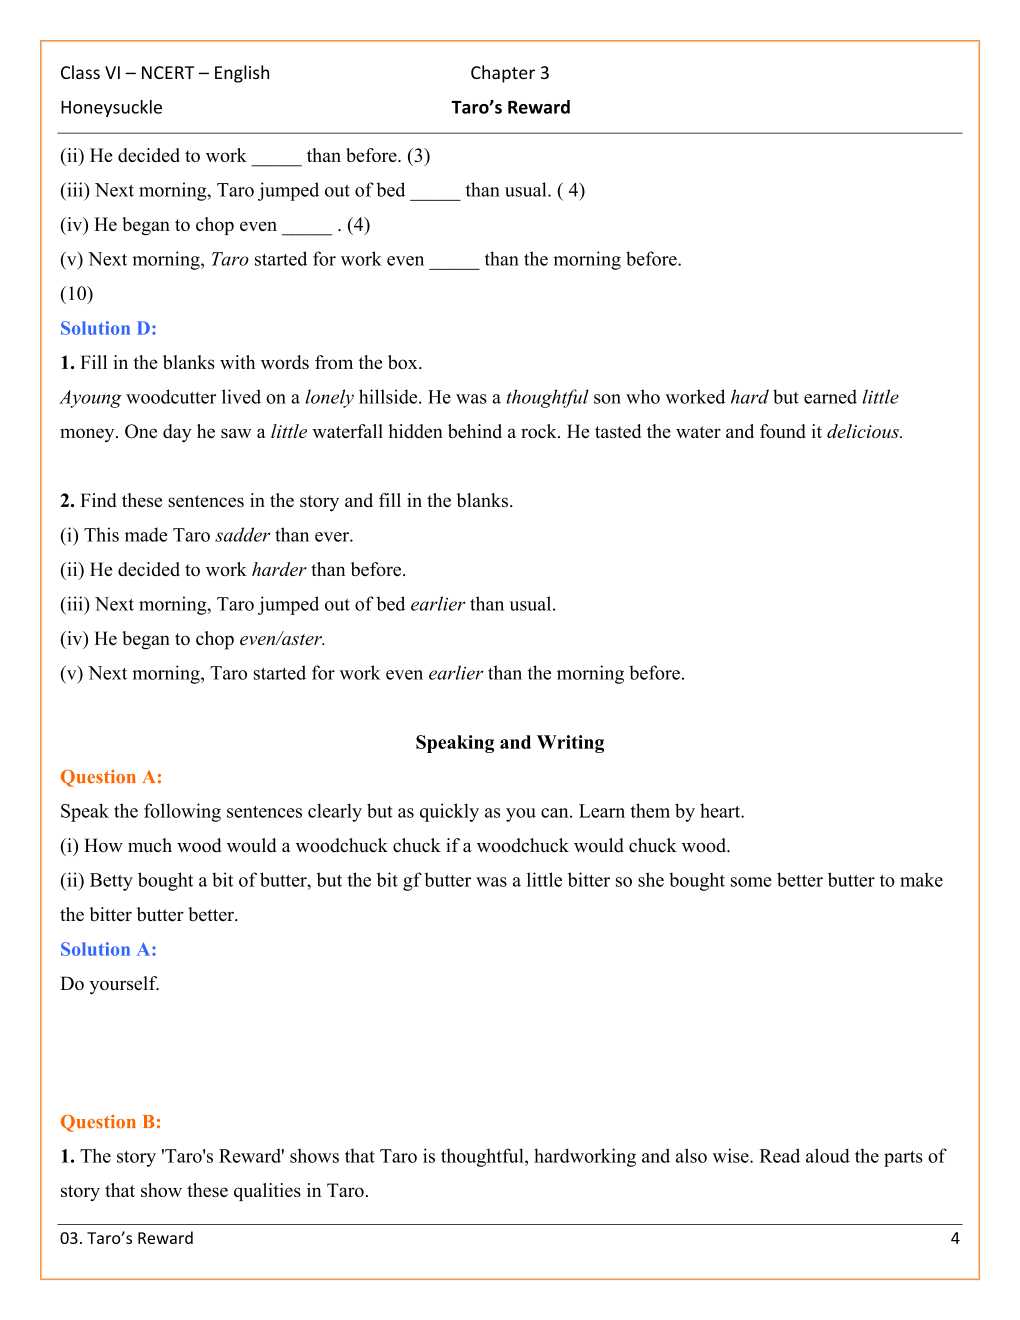 NCERT Solutions For Class 6 English Honeysuckle Chapter 3